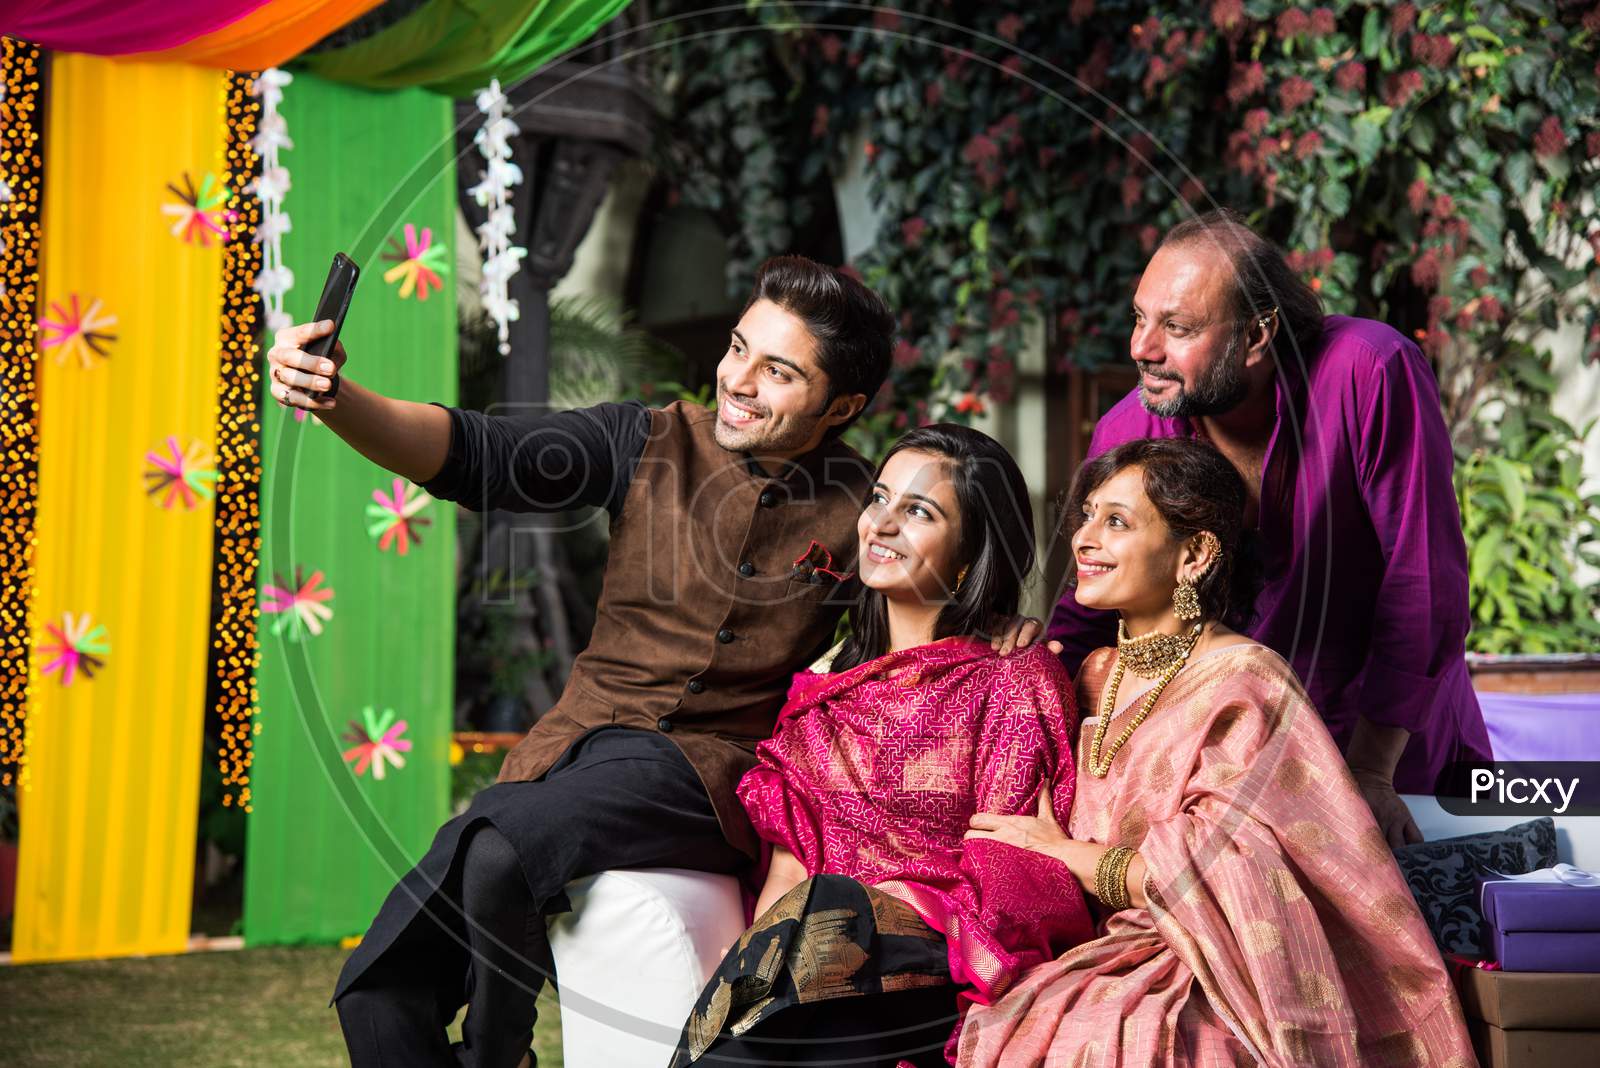 Indian family taking selfie picture using smartphone